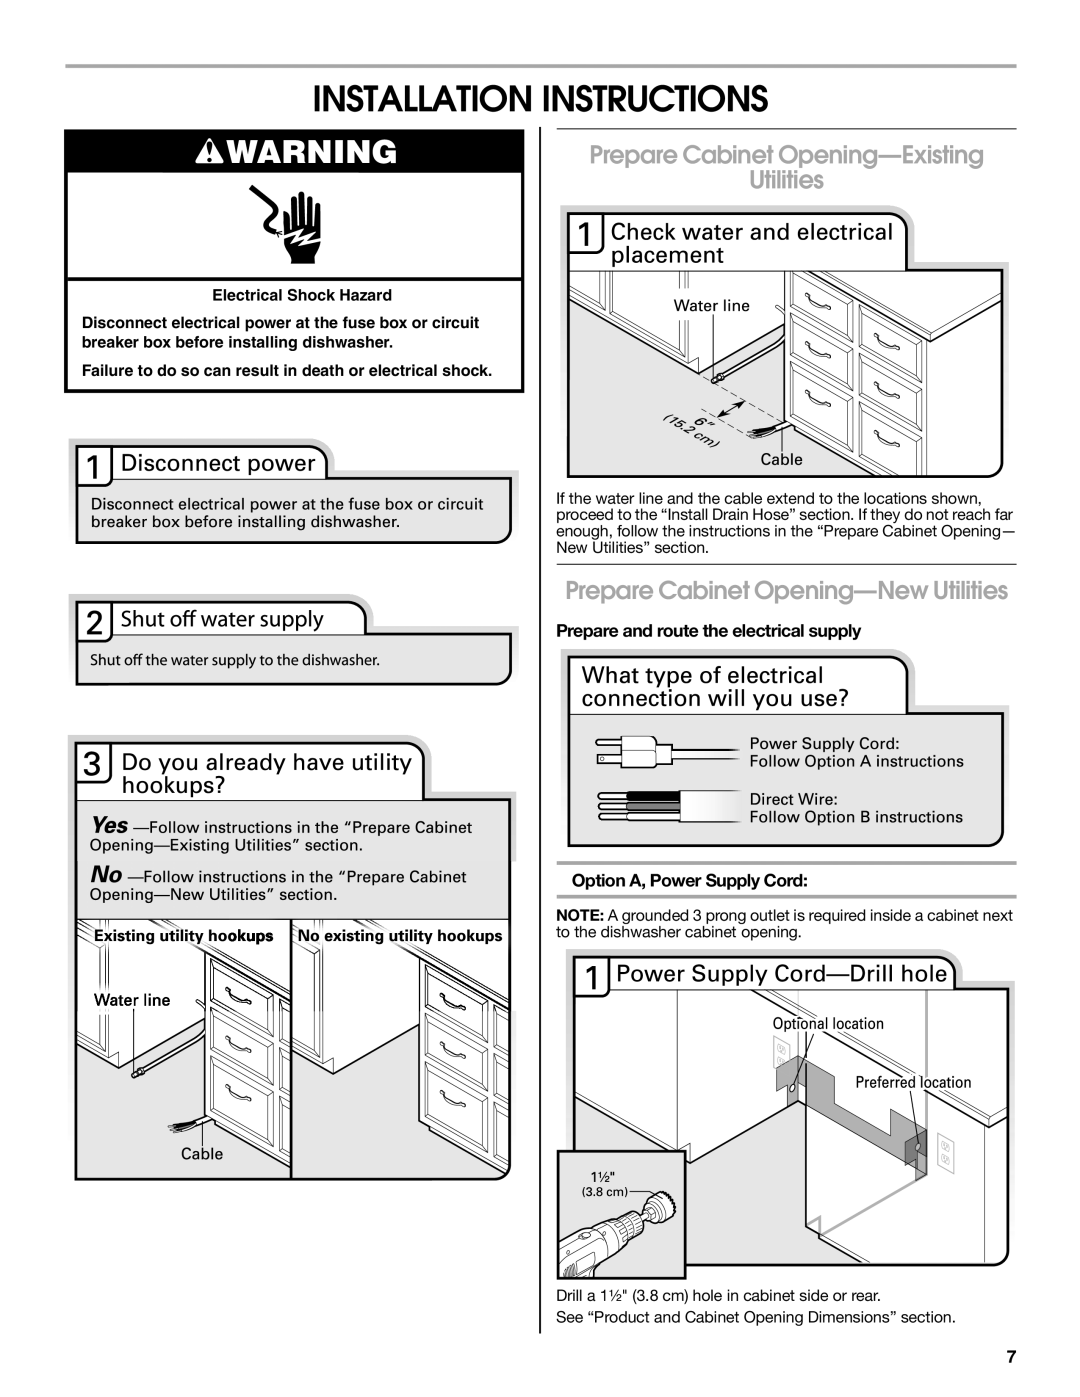 Whirlpool W10435039A Installation Instructions, Prepare Cabinet Opening-Existing Utilities, Option A, Power Supply Cord 